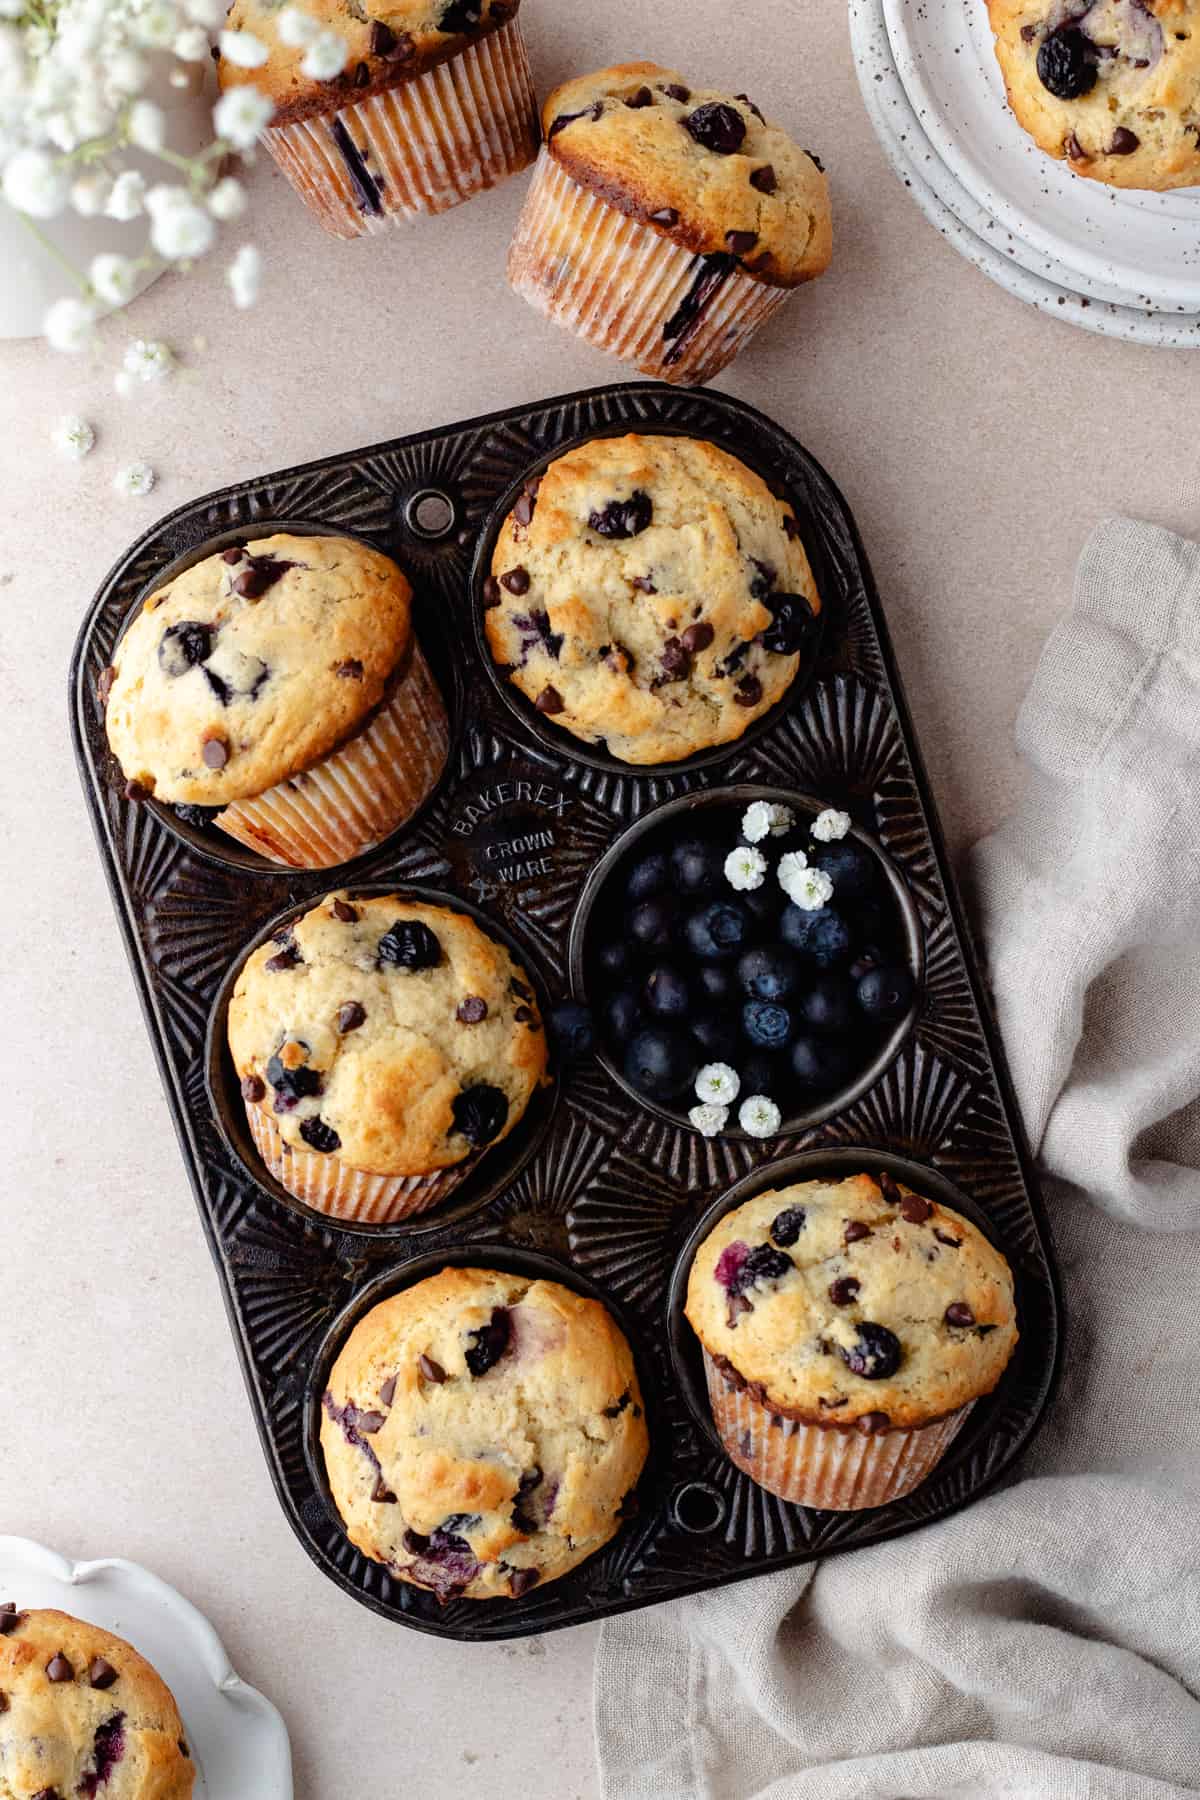 Blueberry chocolate chip muffins in muffin pan.